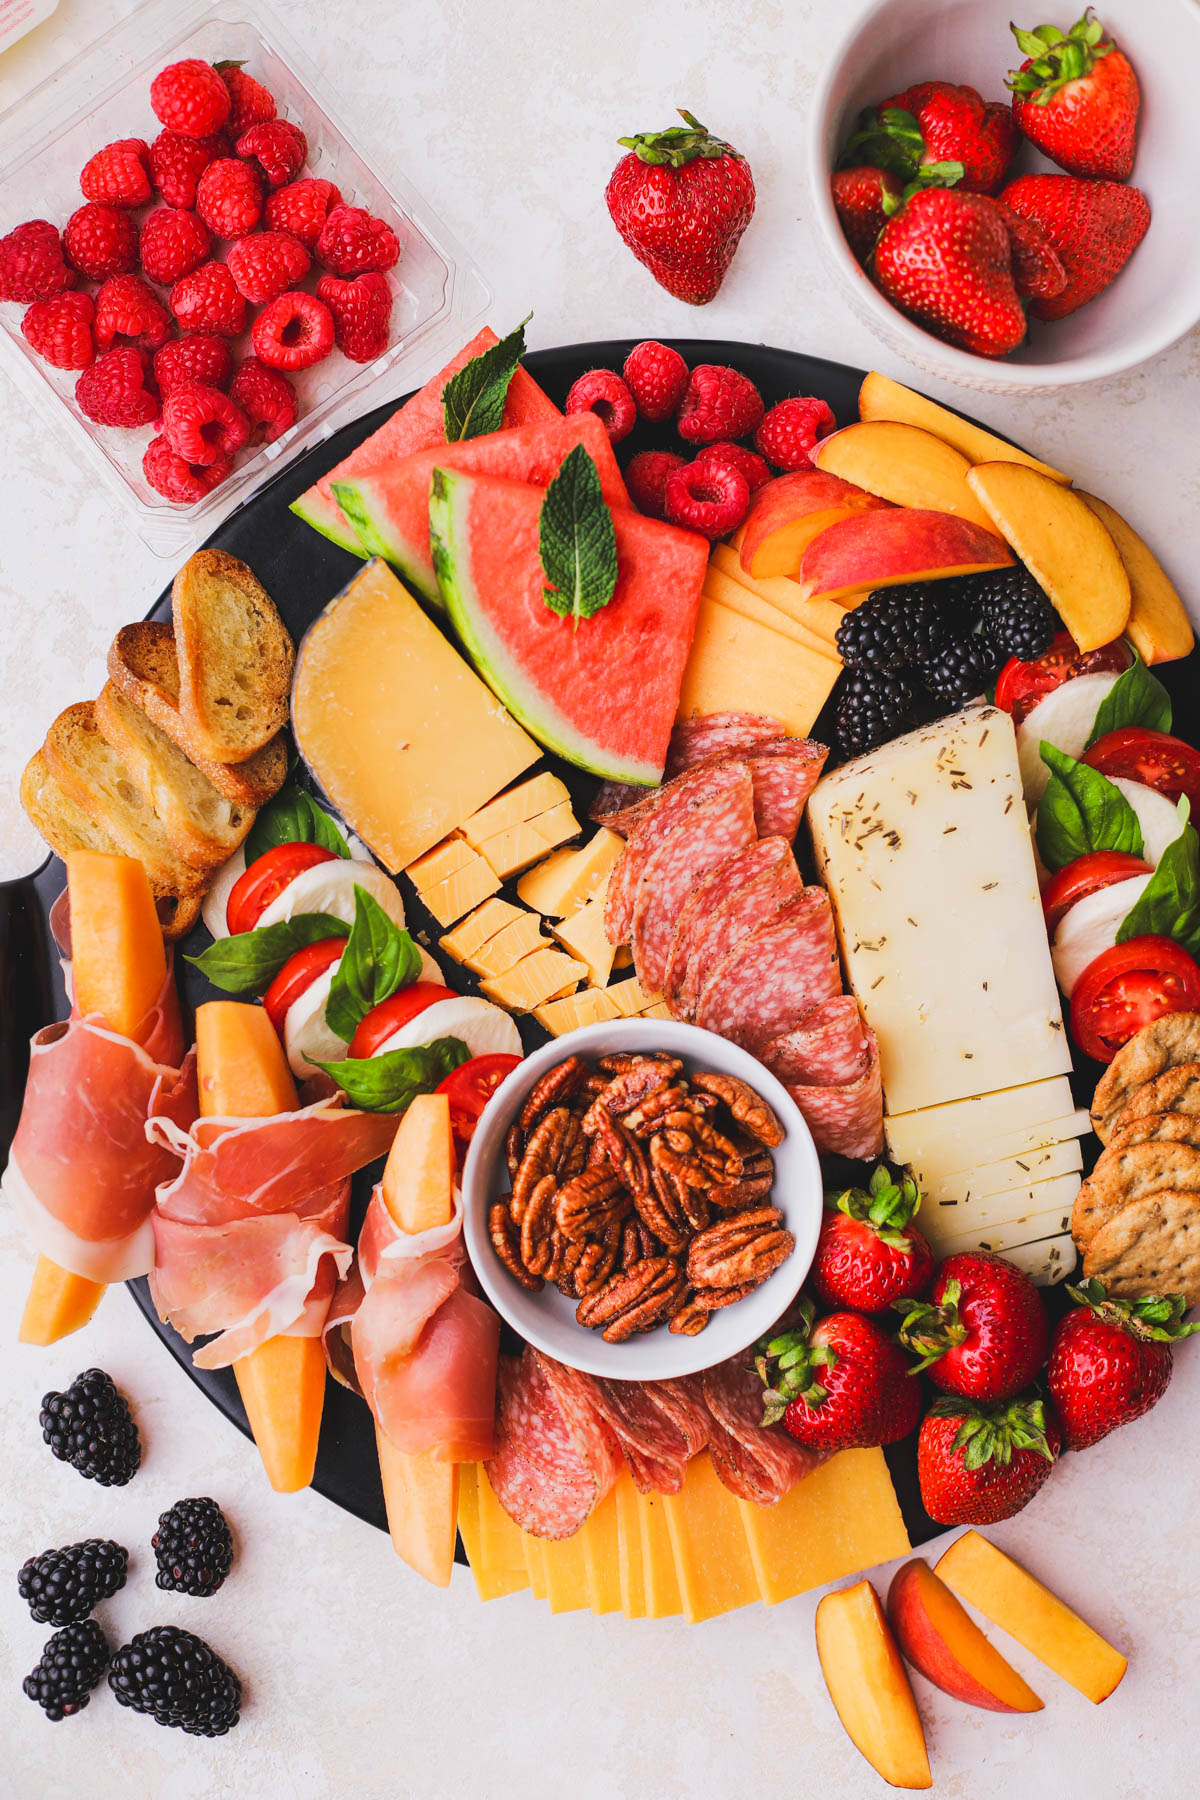 This summer charcuterie board is filled with delicious summer fruit, cheeses and meats.